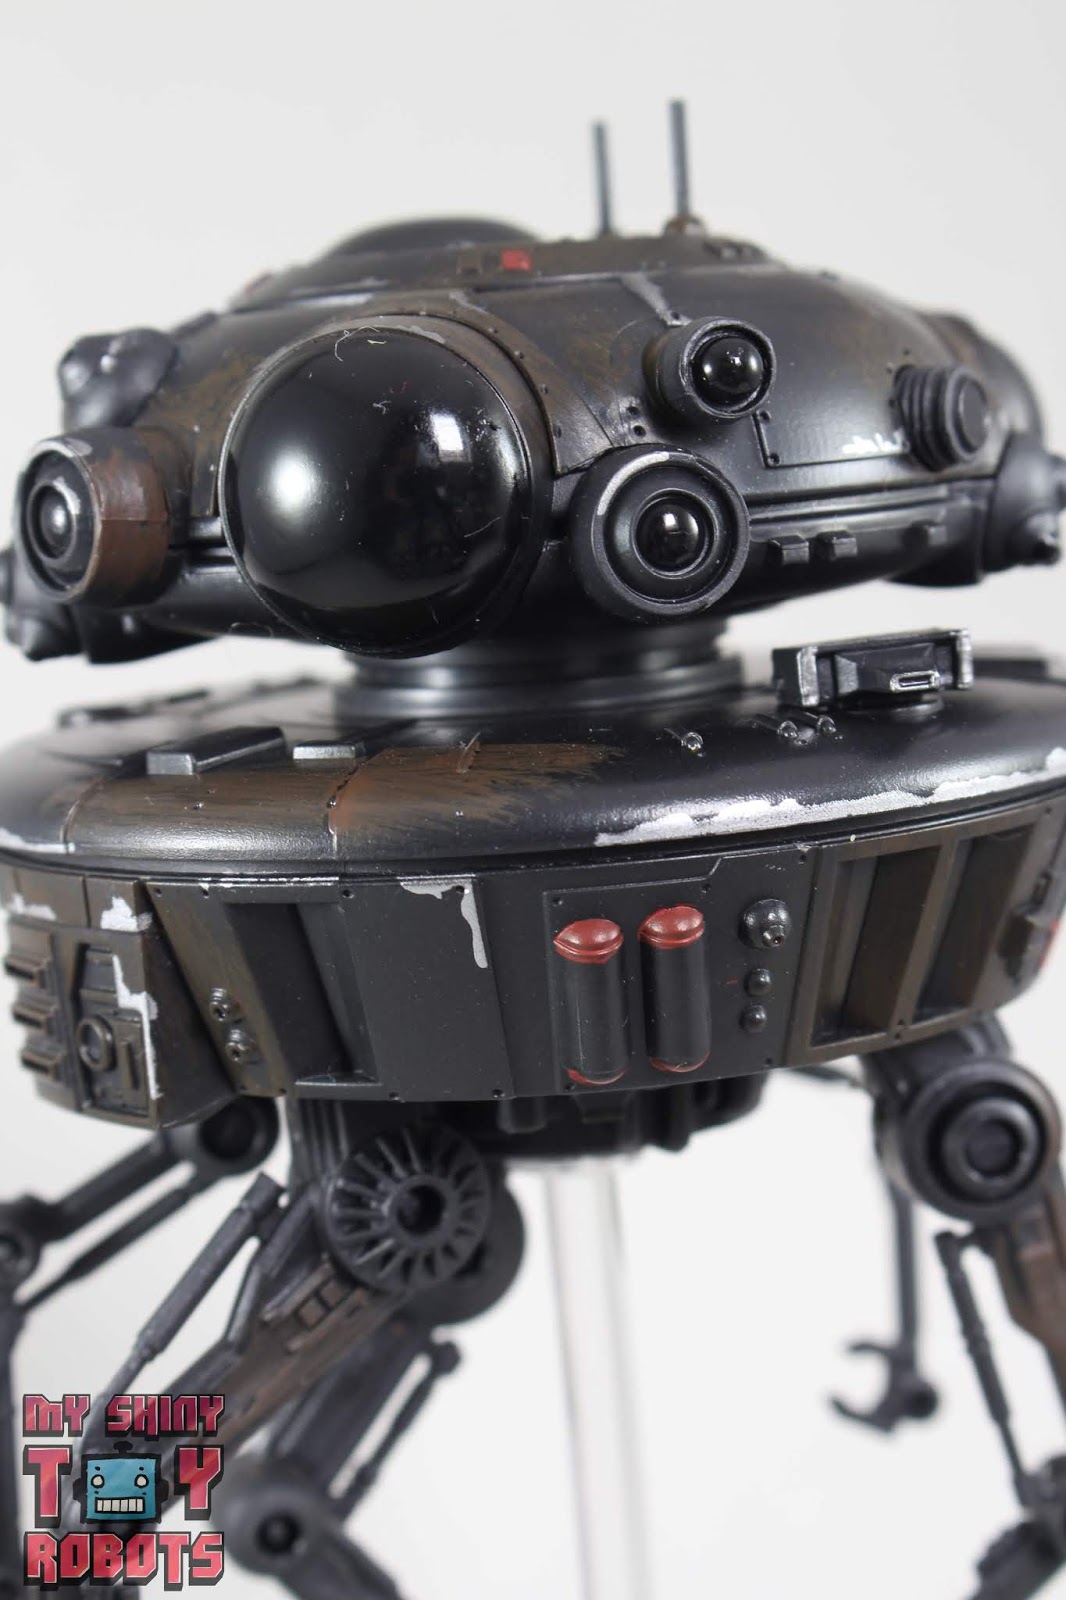 Toy Robots: Toybox REVIEW: Star Wars Black Series Imperial Probe Droid